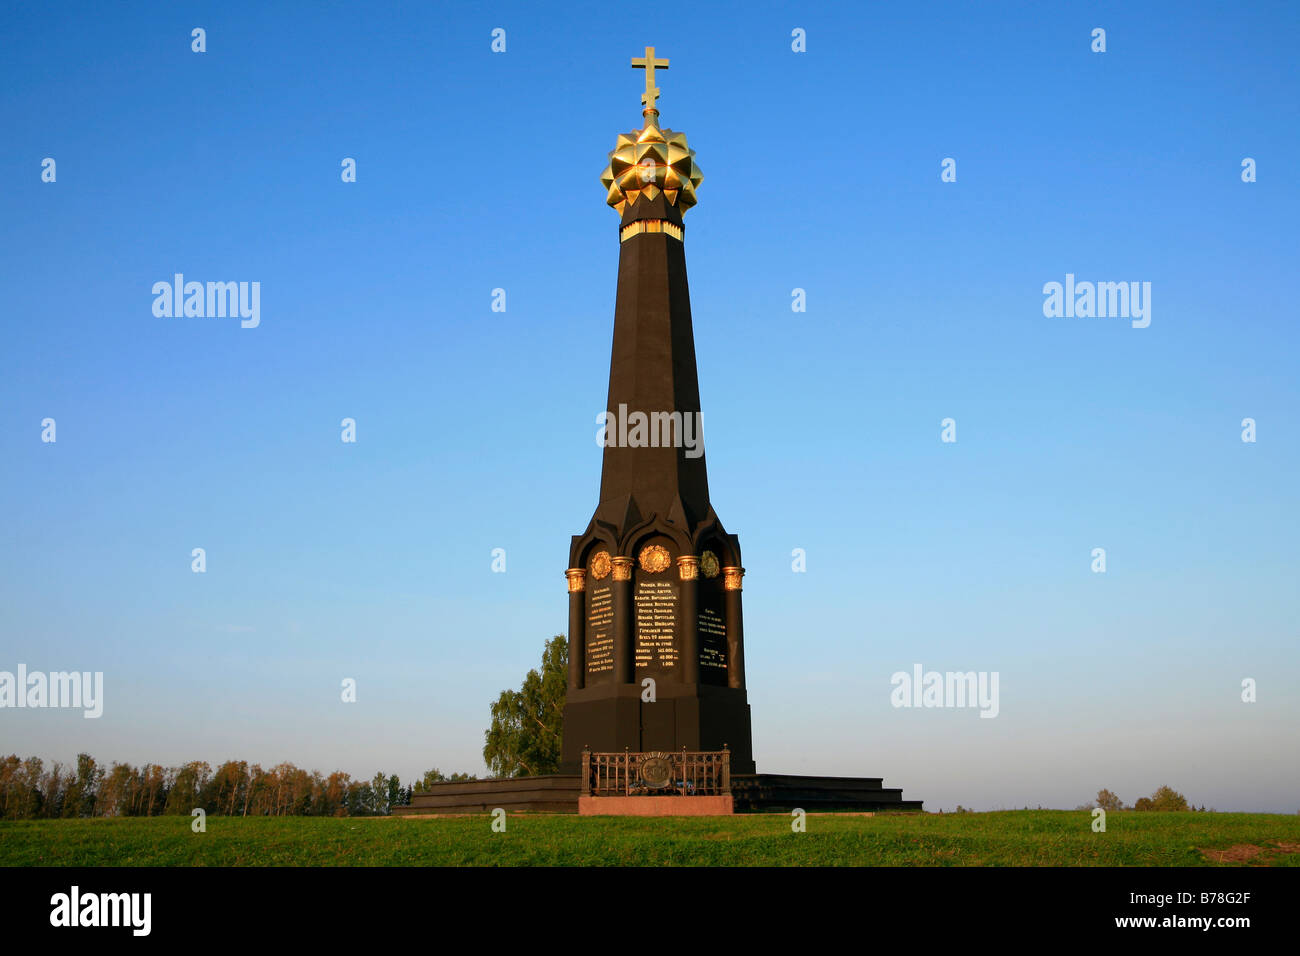 The Raevsky Monument by daytime in Borodino, Russia Stock Photo